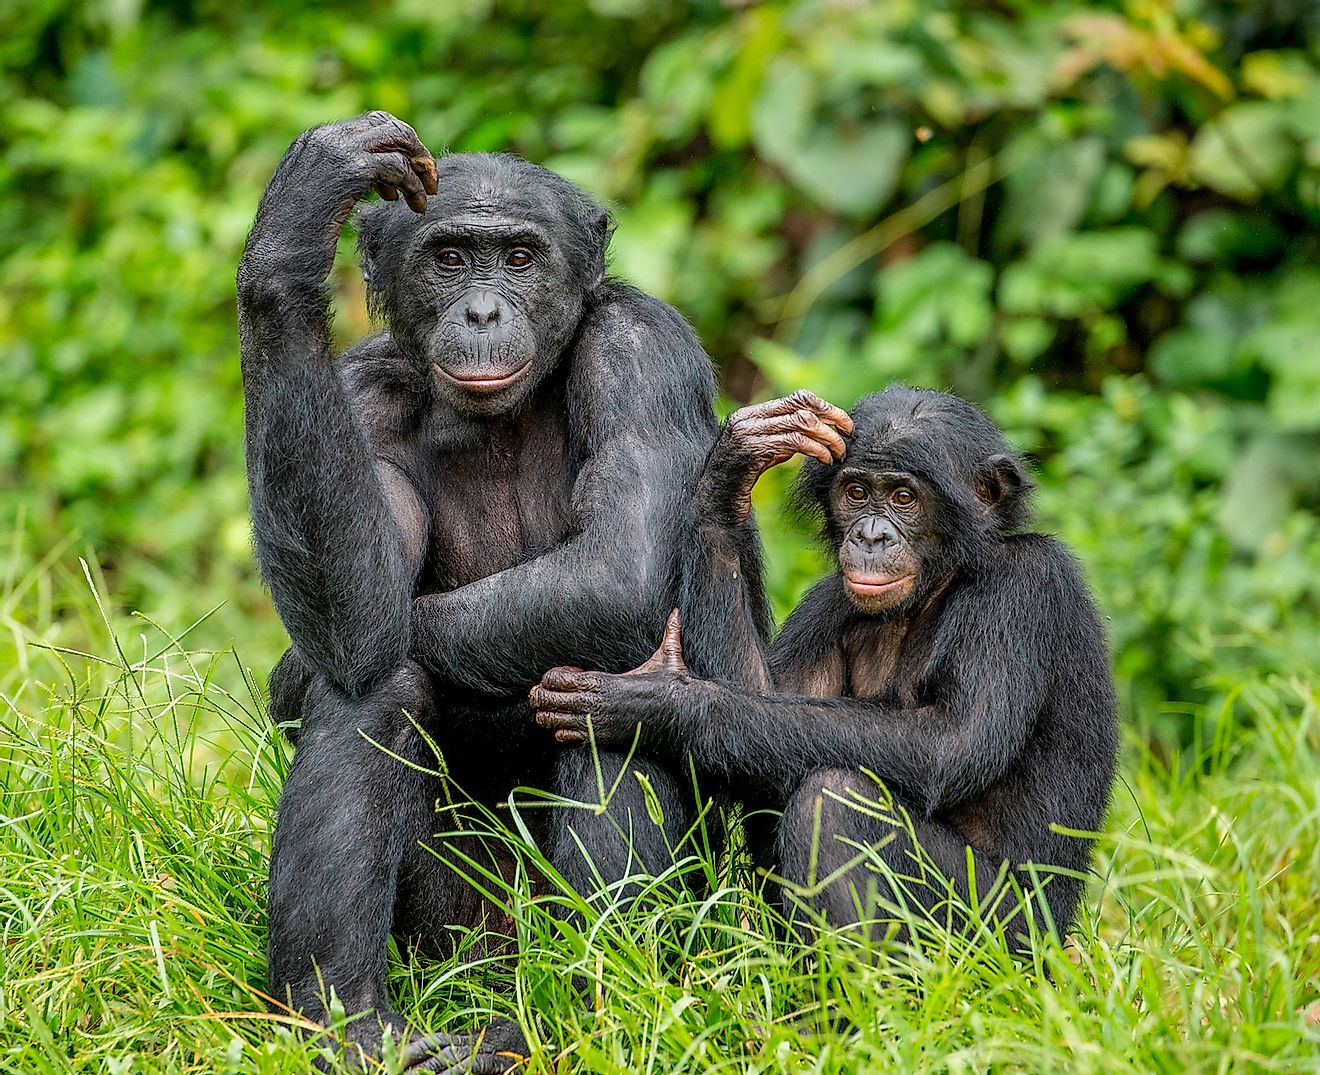 Female bonobo with a baby is sitting on the grass. Democratic Republic of the Congo, Africa. Image credit: GUDKOV ANDREY/Shutterstock.com